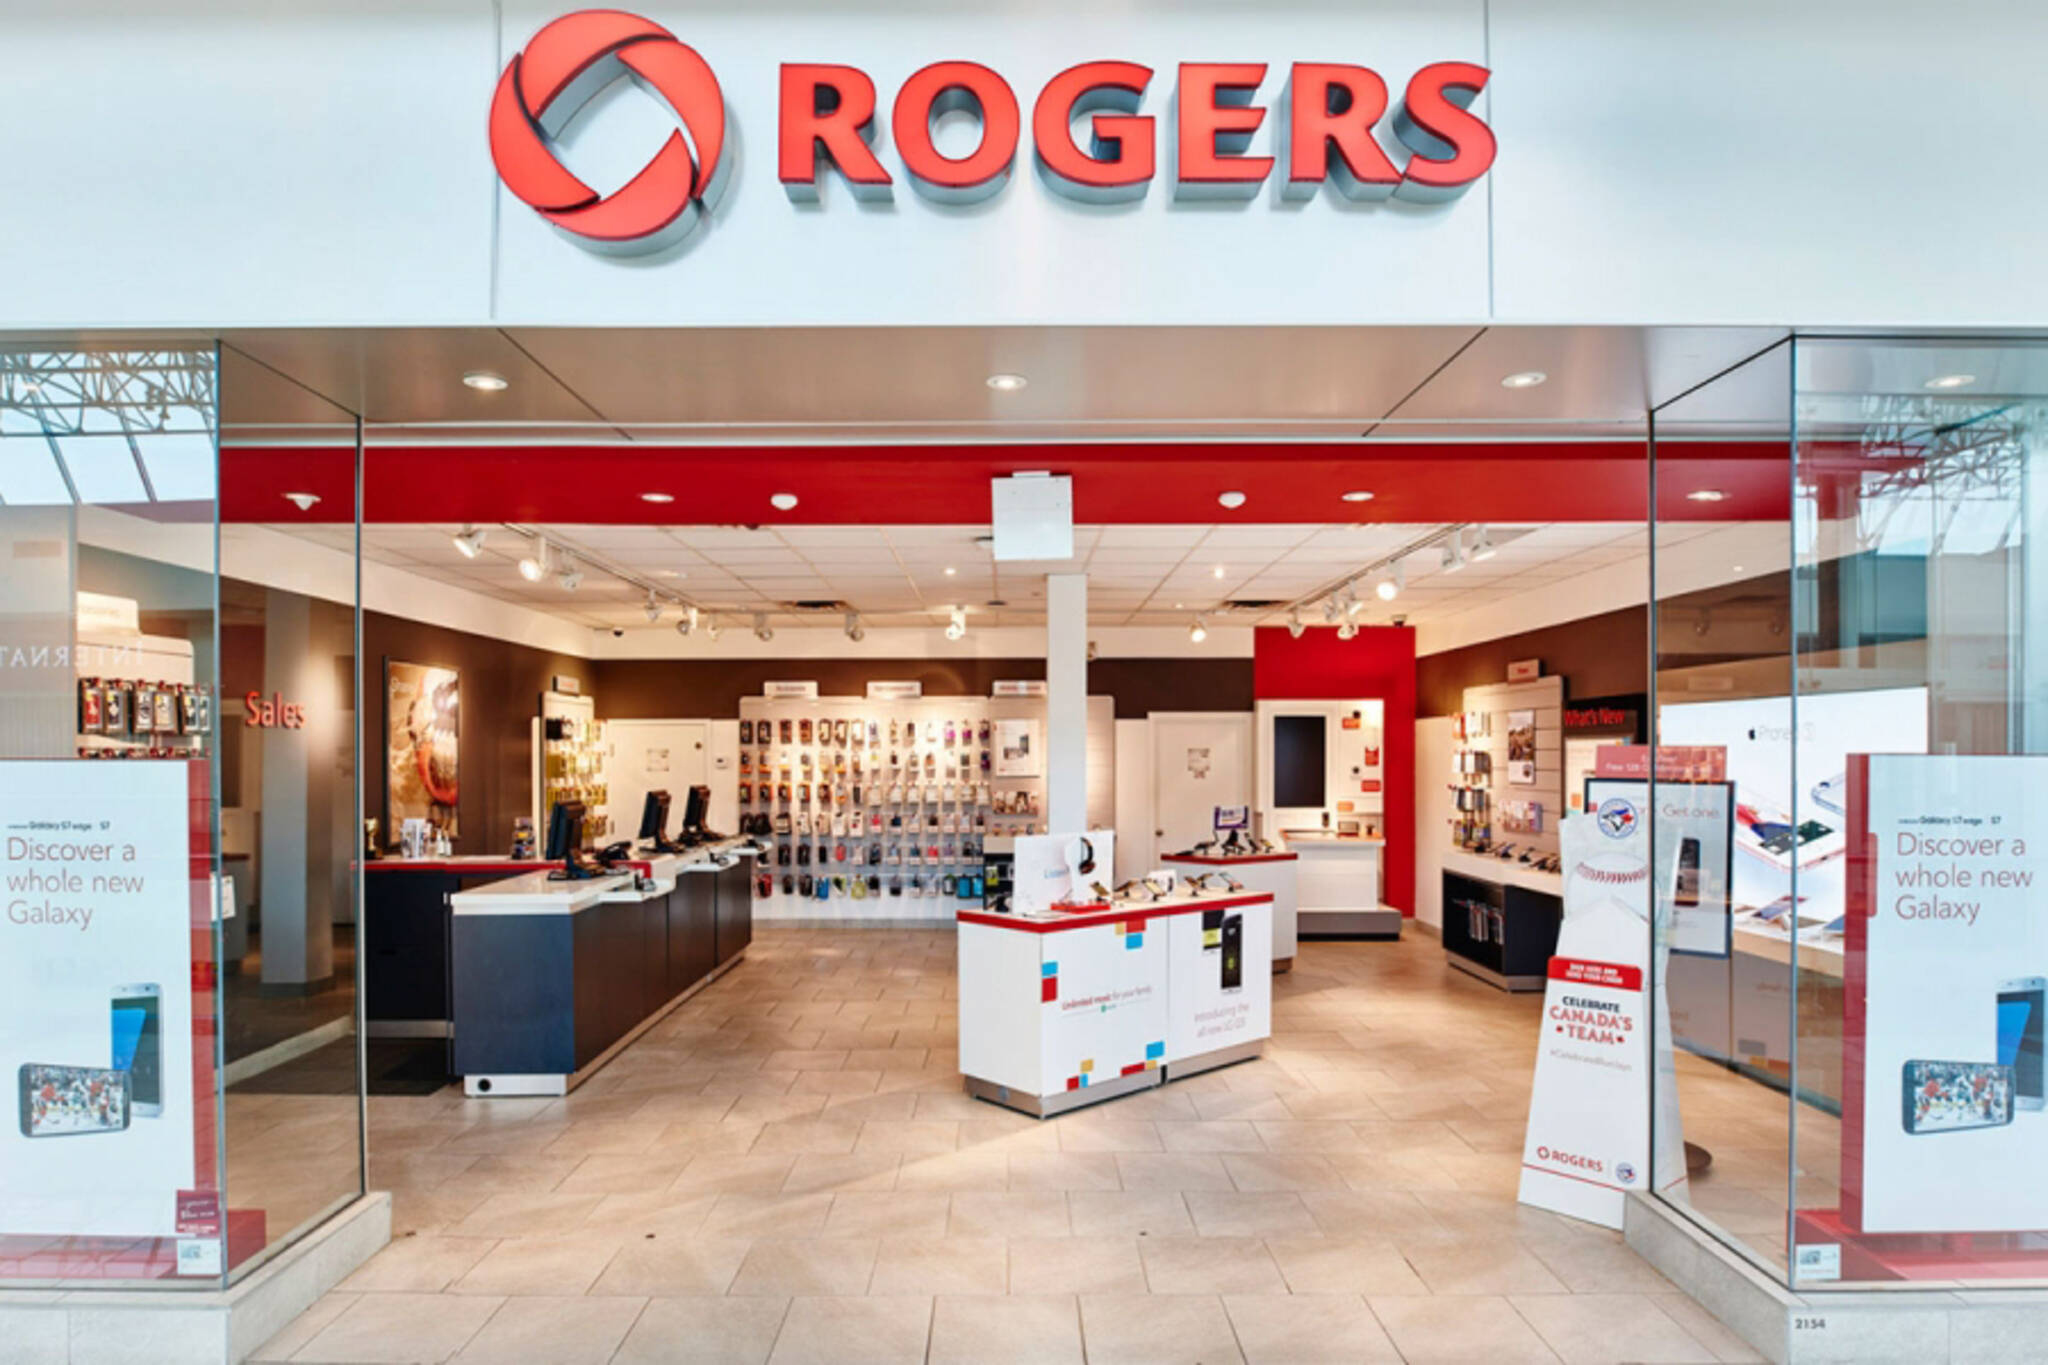 20190708 Rogers ?w=2048&cmd=resize Then Crop&height=1365&quality=70